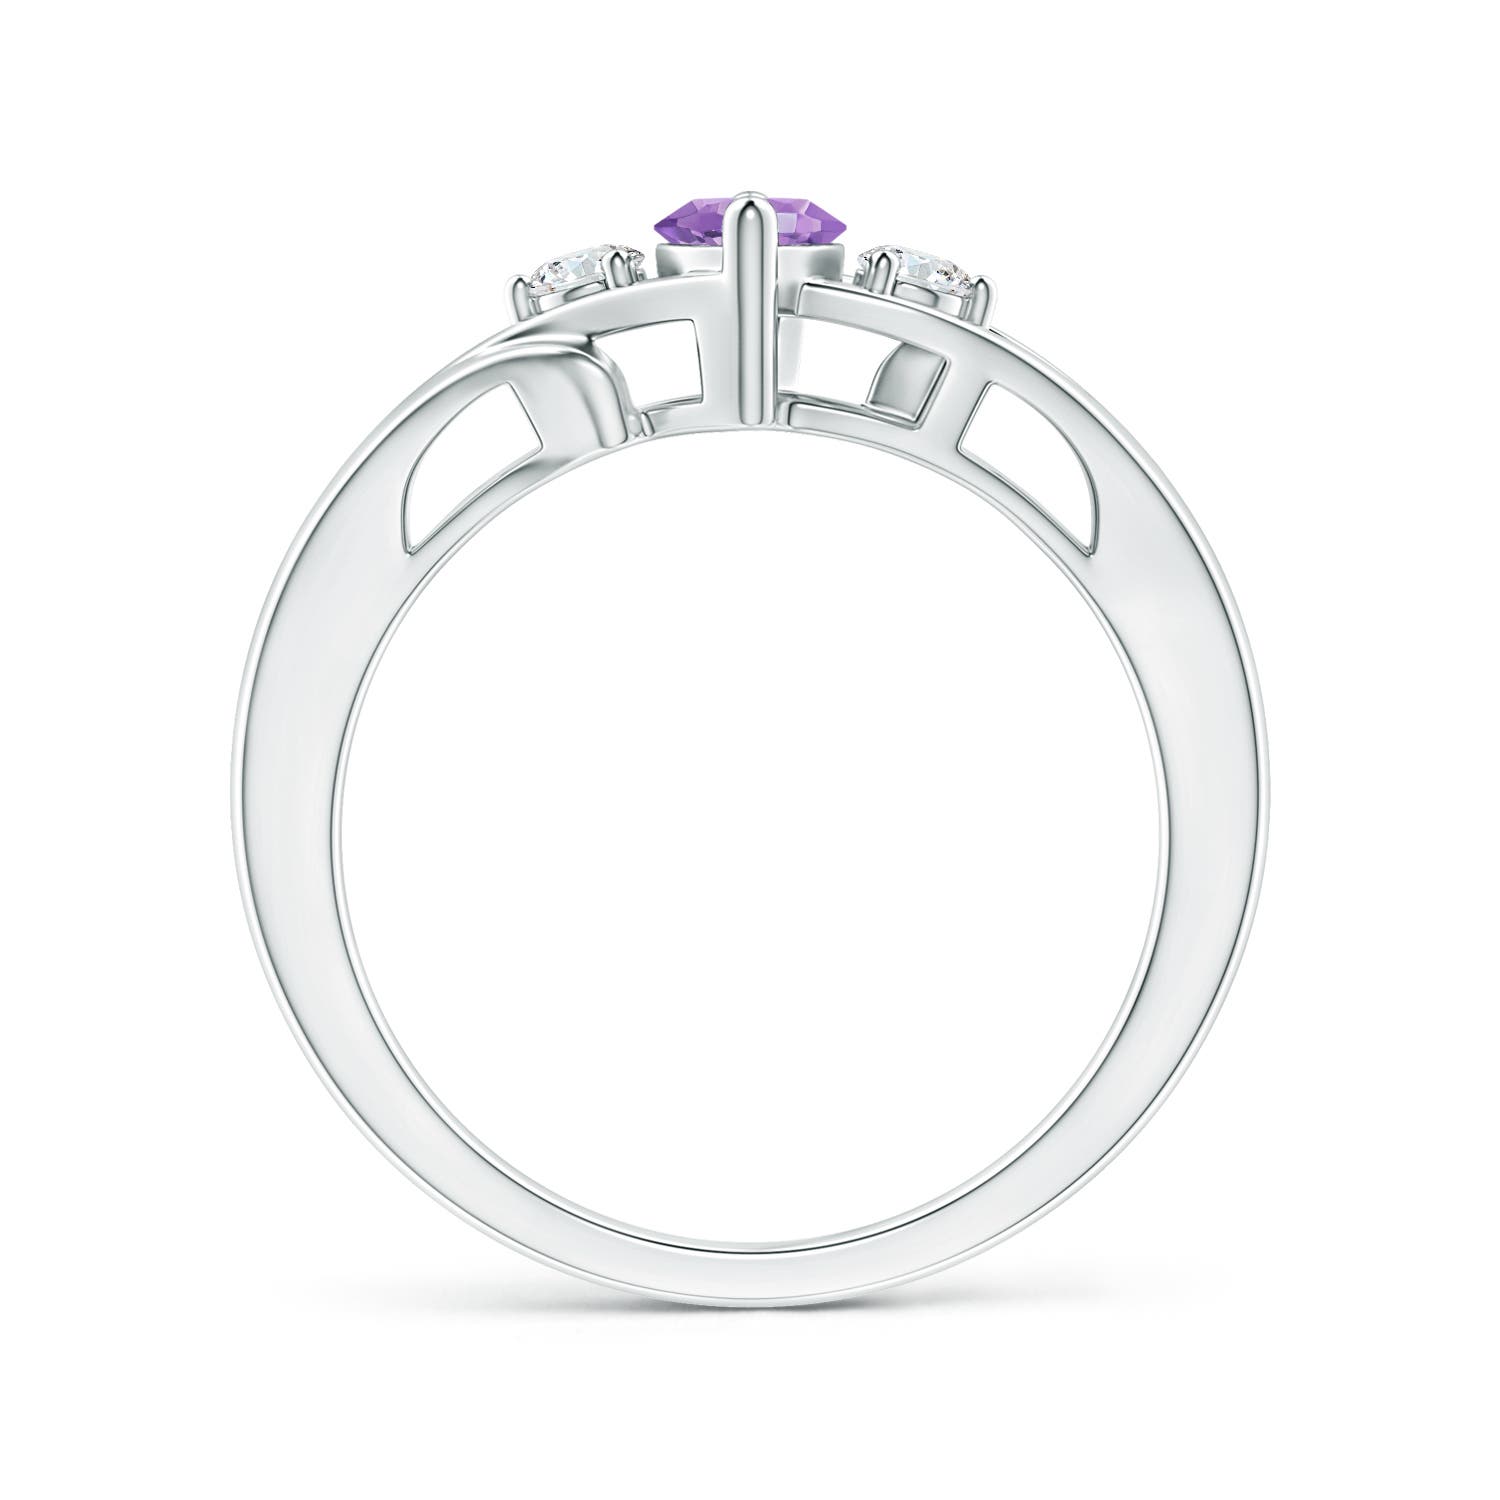 A - Amethyst / 0.64 CT / 14 KT White Gold